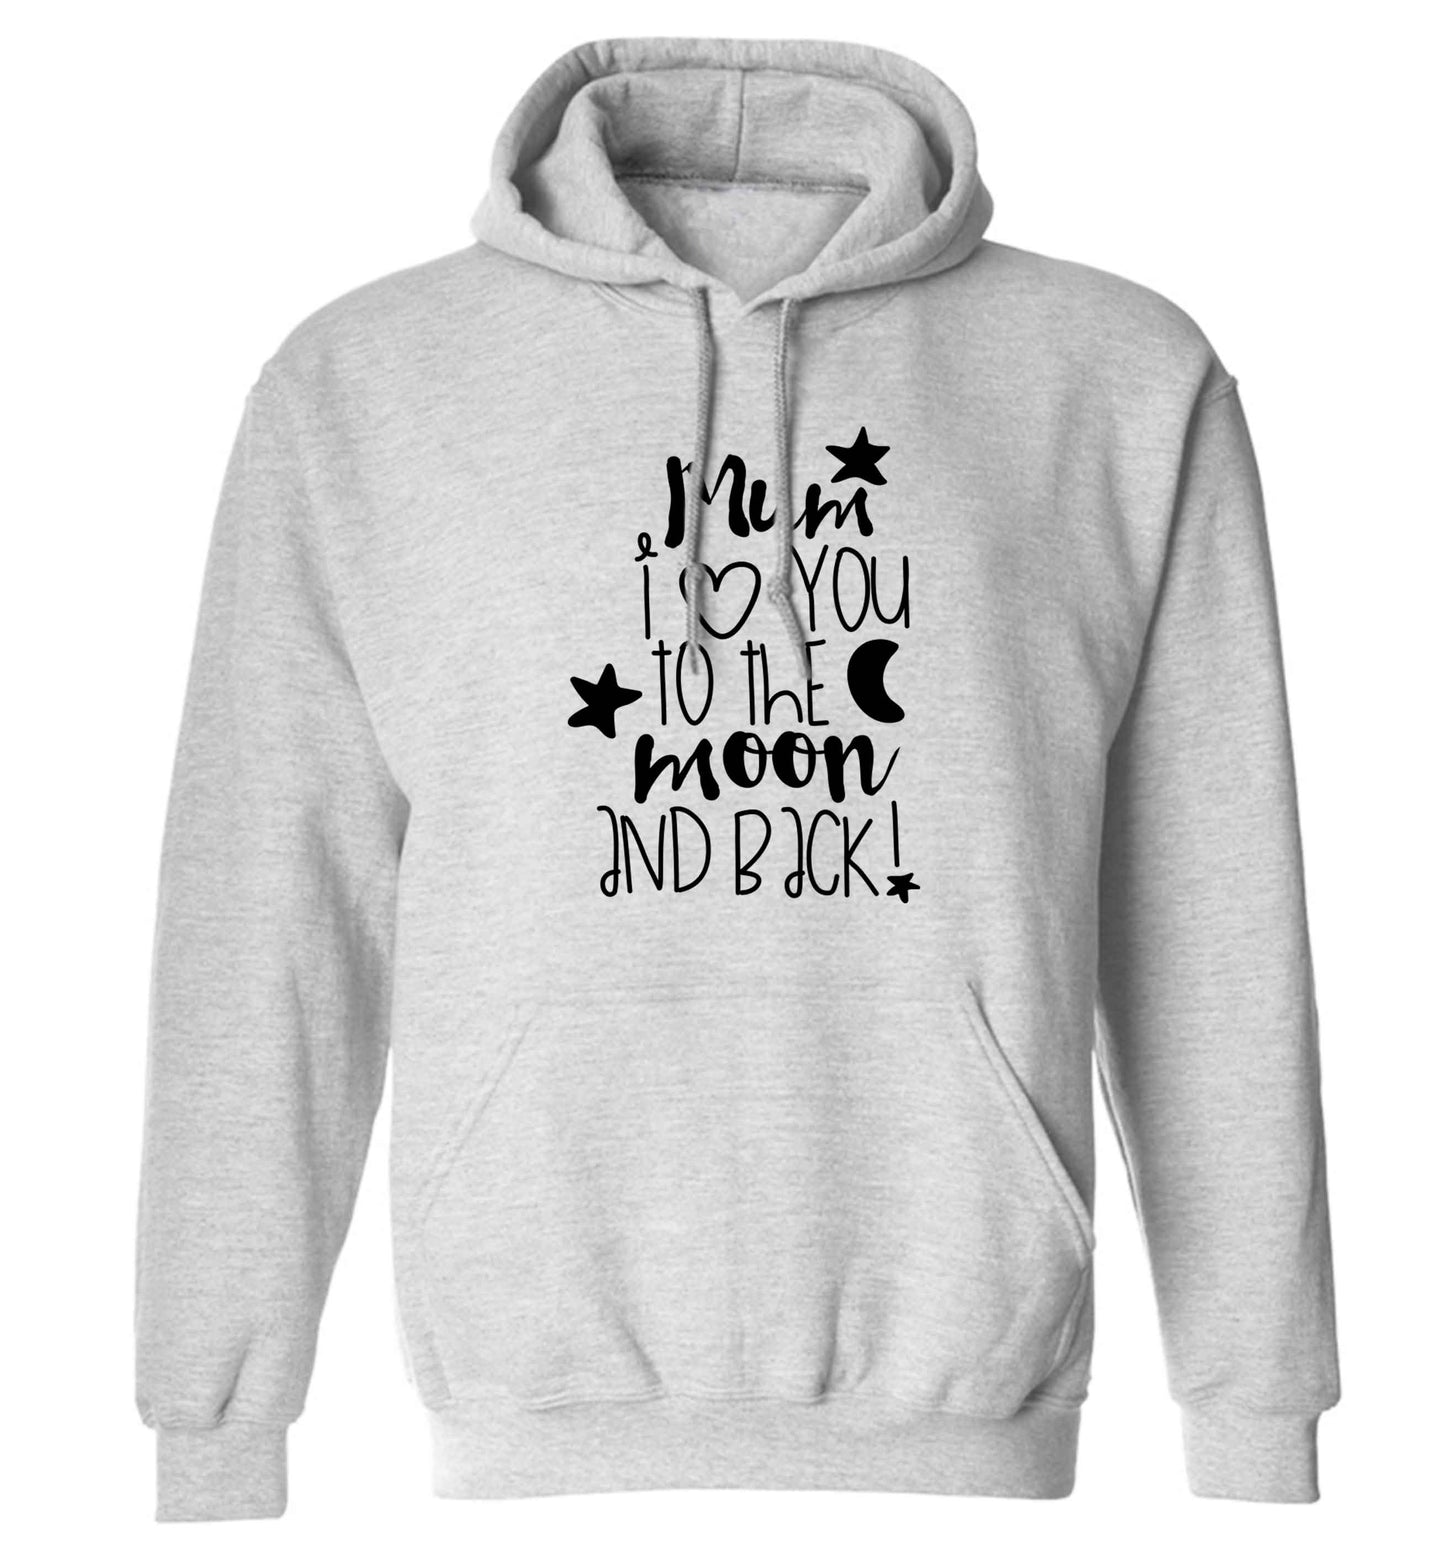 Mum I love you to the moon and back adults unisex grey hoodie 2XL